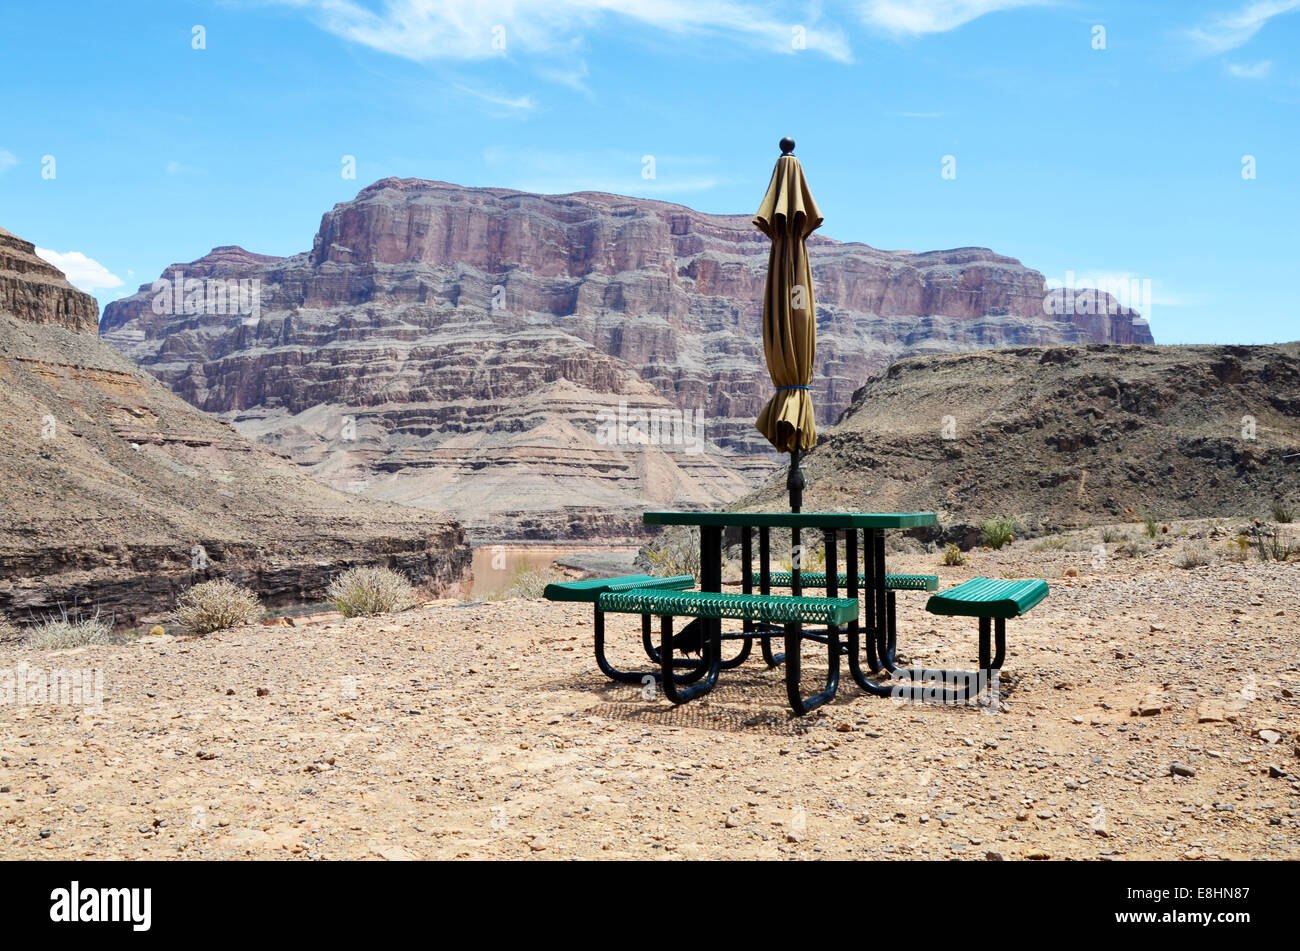 Picnic Area at the bottom of Grand Canyon Stock Photo